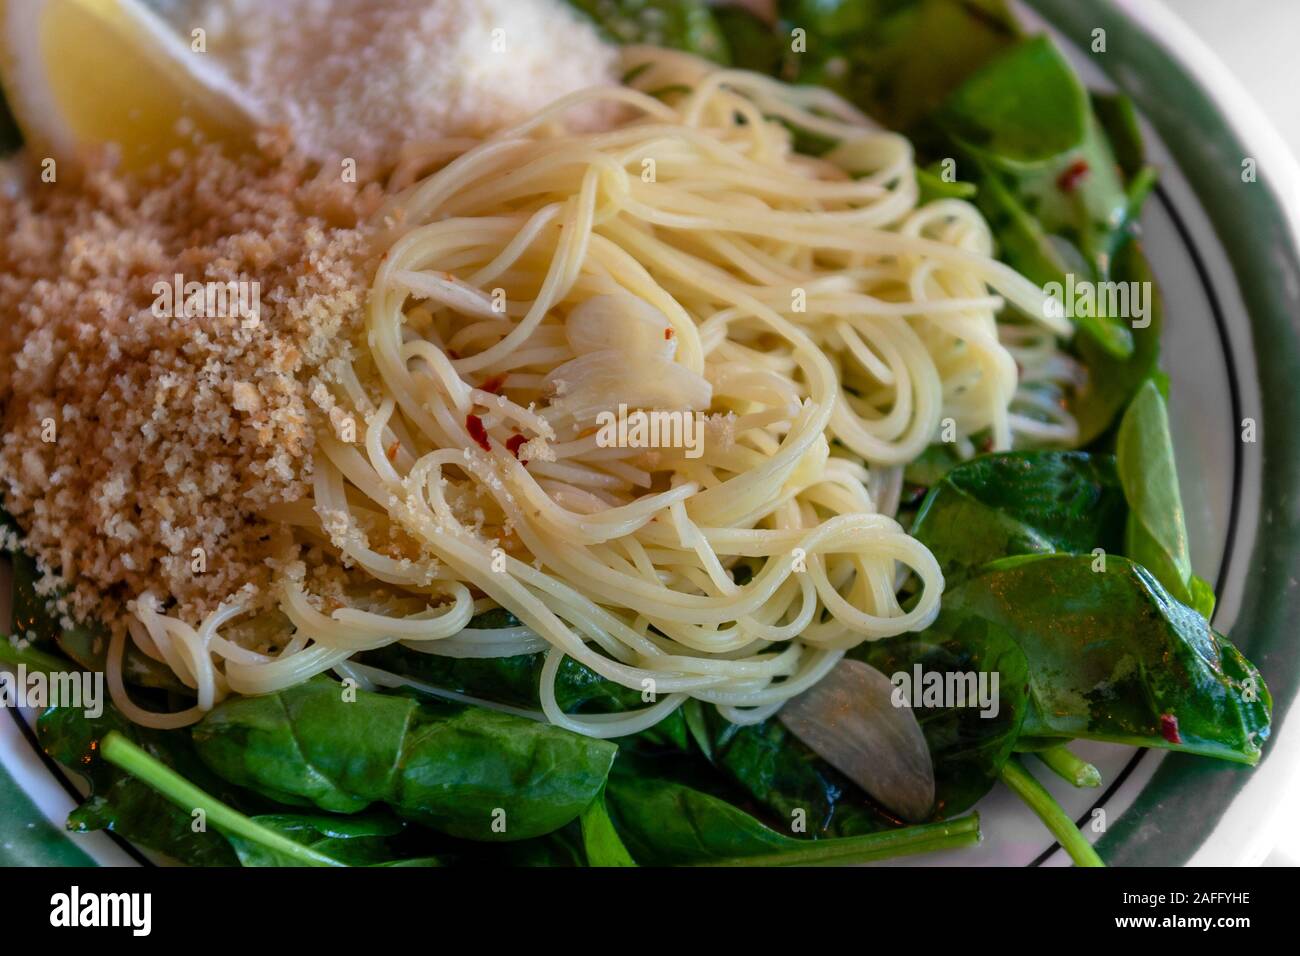 https://c8.alamy.com/comp/2AFFYHE/close-up-on-capellini-angel-hair-pasta-with-virgin-olive-oil-spinach-fresh-lemon-chili-flakes-garlic-and-toasted-bread-crumbs-dinner-angle-view-2AFFYHE.jpg